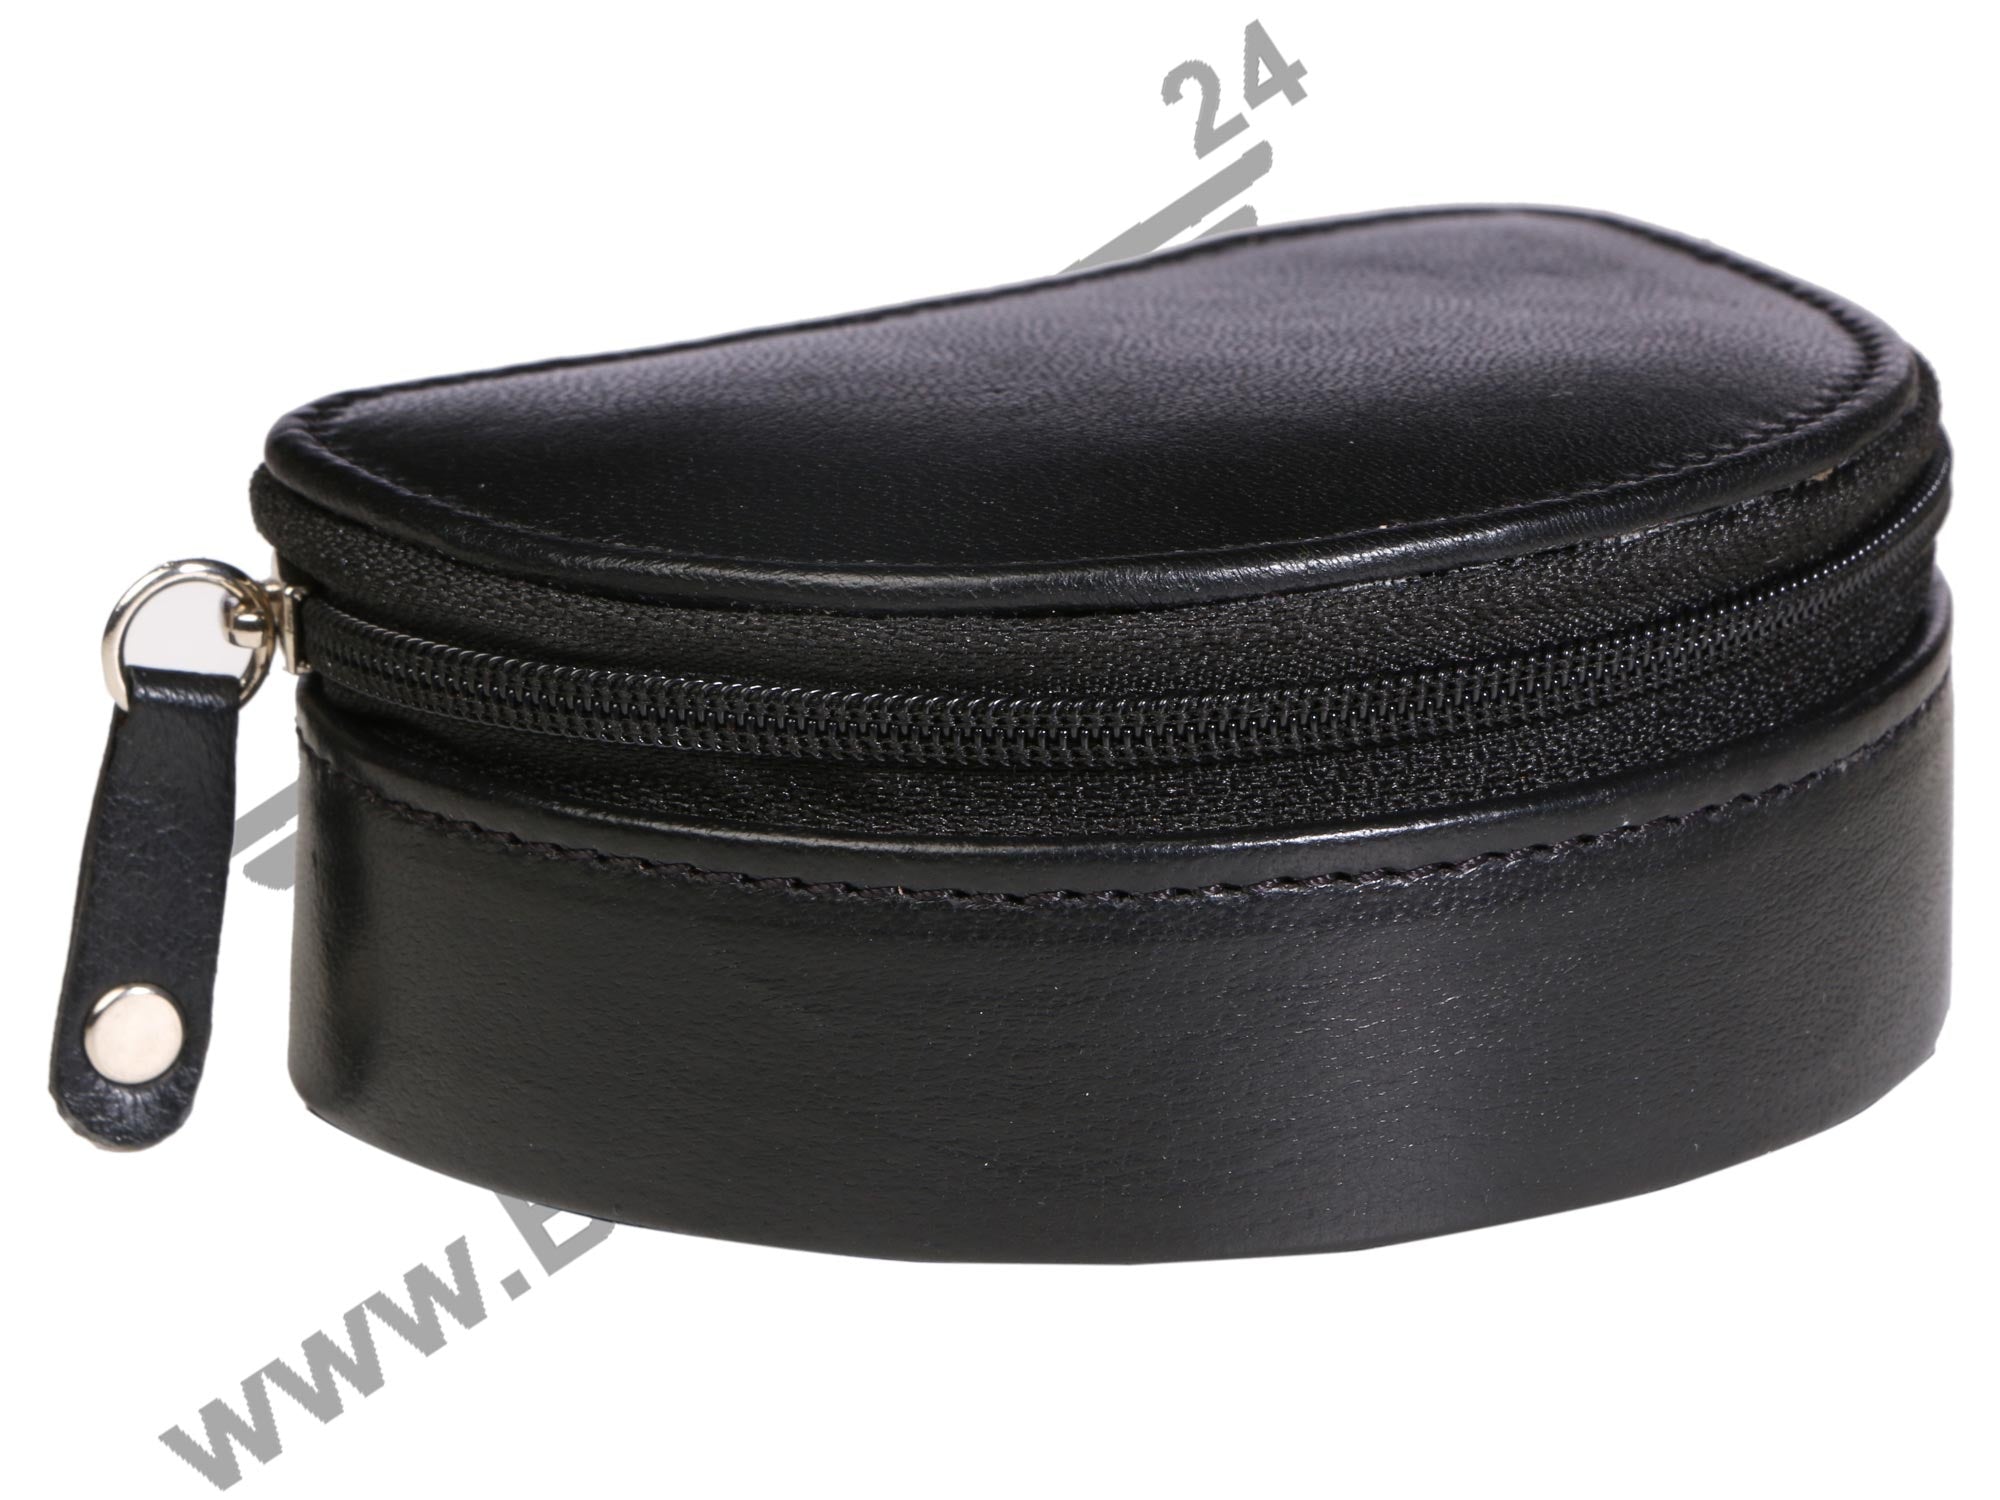 Front image of black TRAVEL SMALL JEWELERY CASE. The lid is zipped.